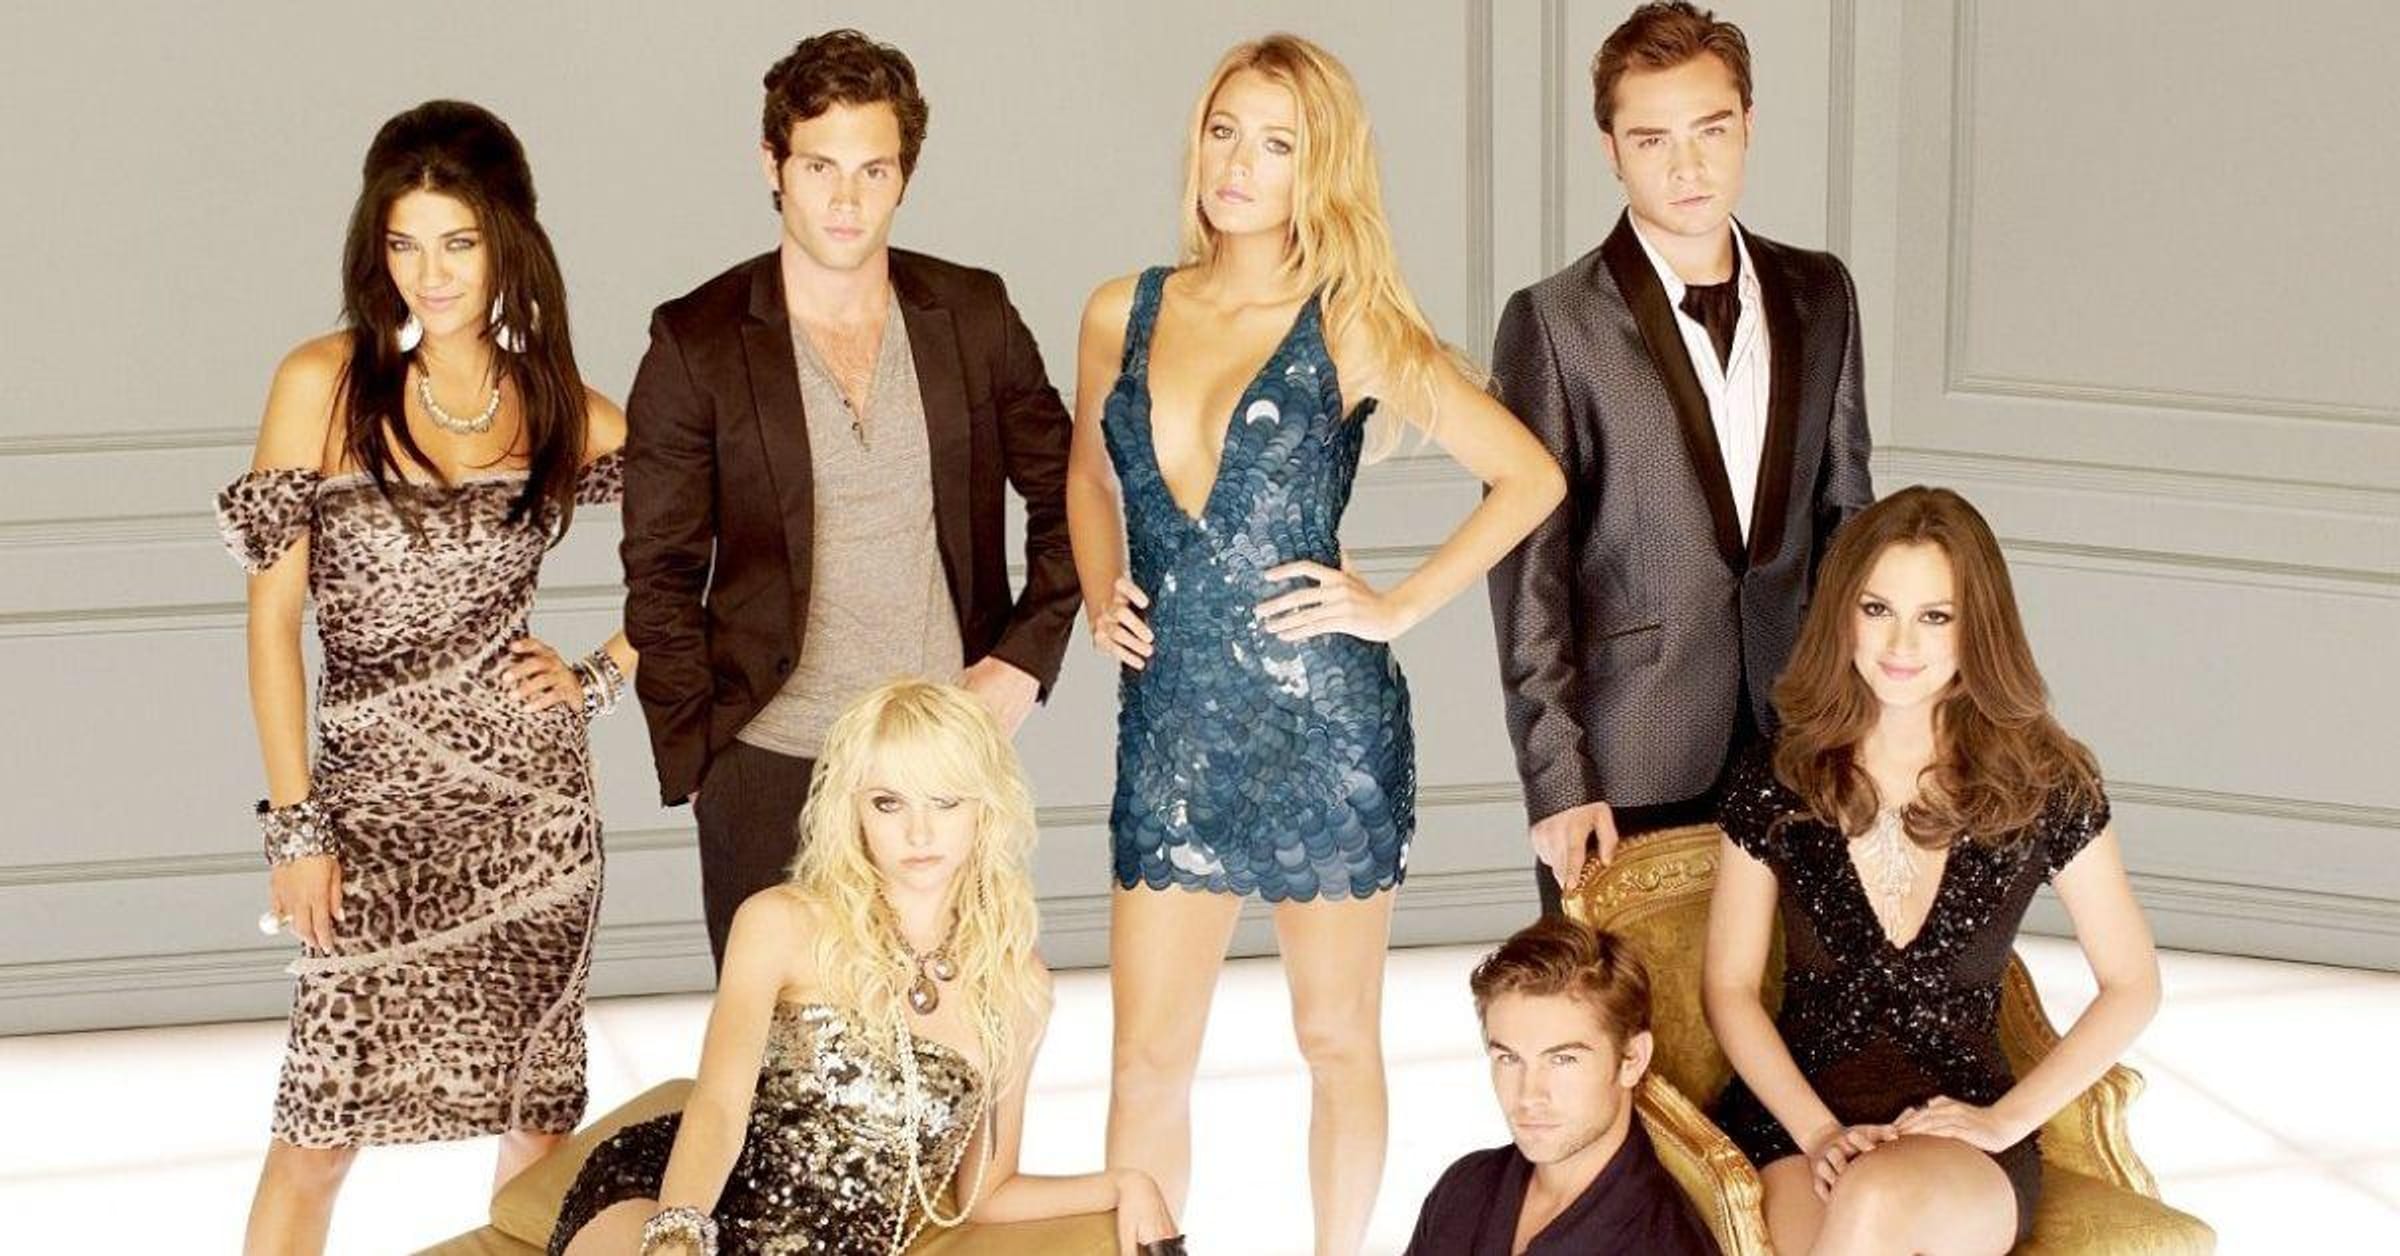 Gossip Girl: The Complete Second Season: : Blake Lively, Leighton  Meester, Penn Badgley, Chace Crawford, Taylor Momsen, Ed Westwick, Kelly  Rutherford, Matthew Settle, Jessica Szohr: Movies & TV Shows